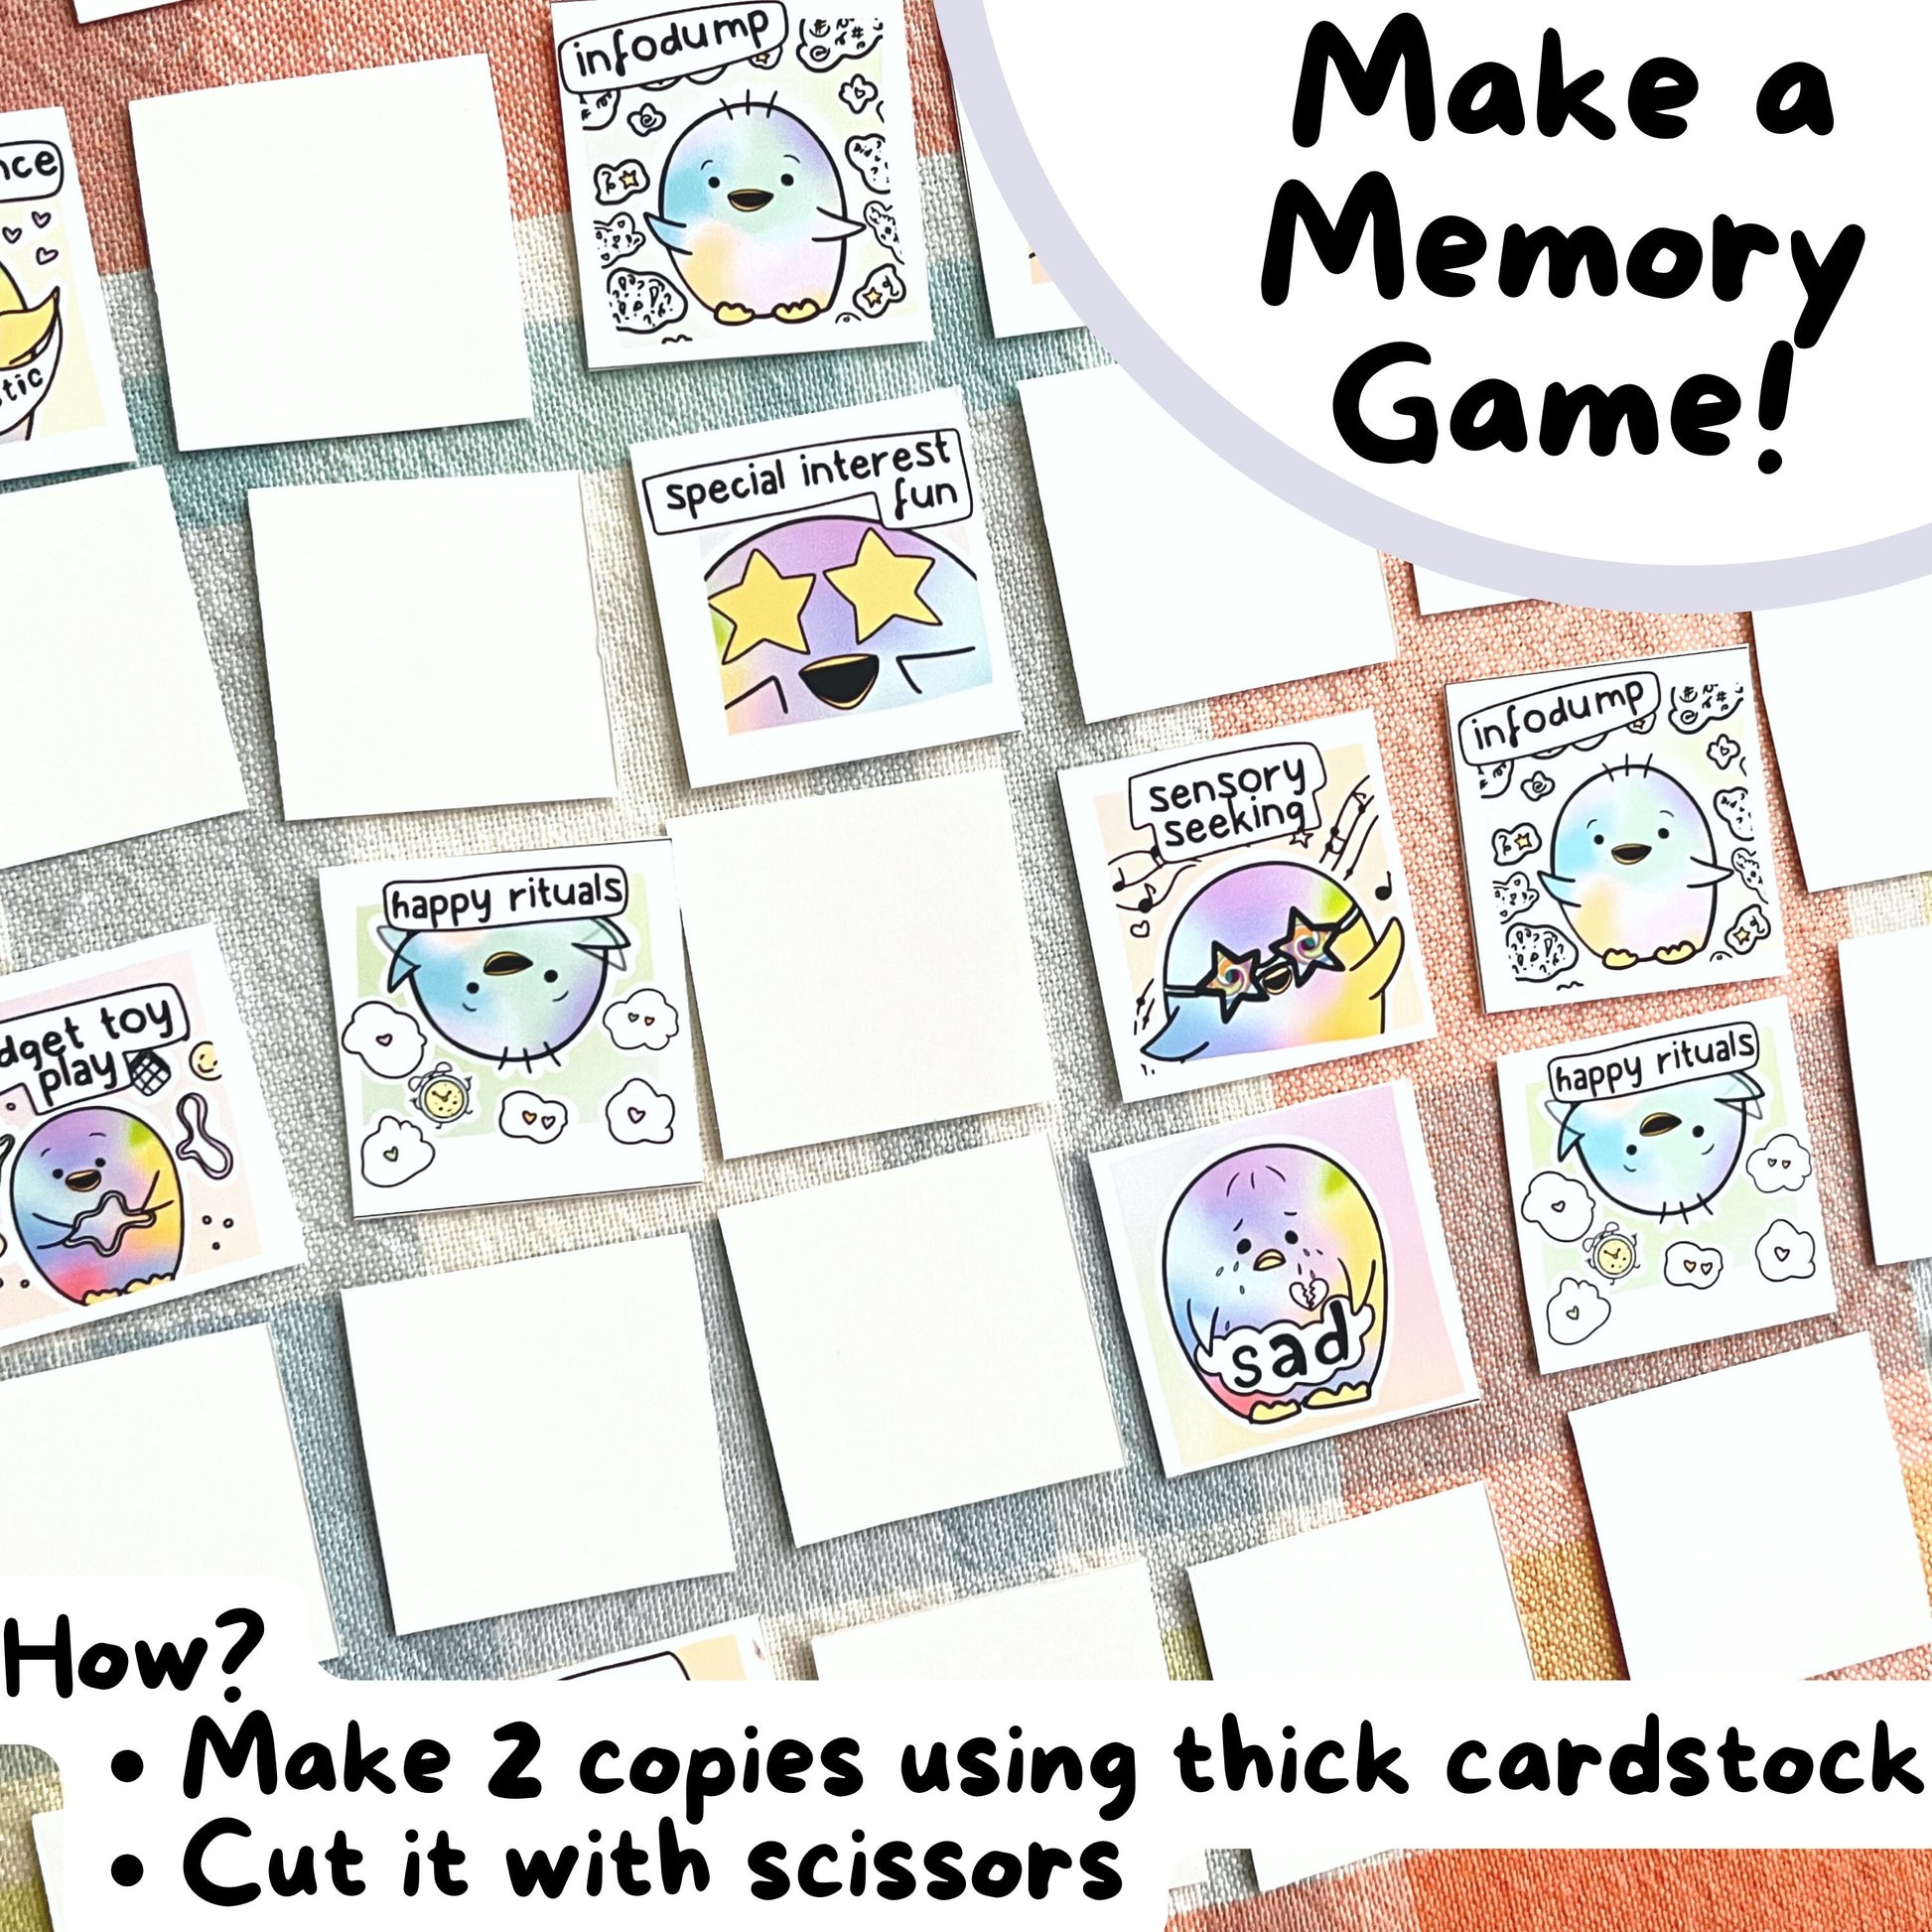 3. Make 2 copies (using art paper or thick cardstock) and make your own Autism MEMORY GAME.